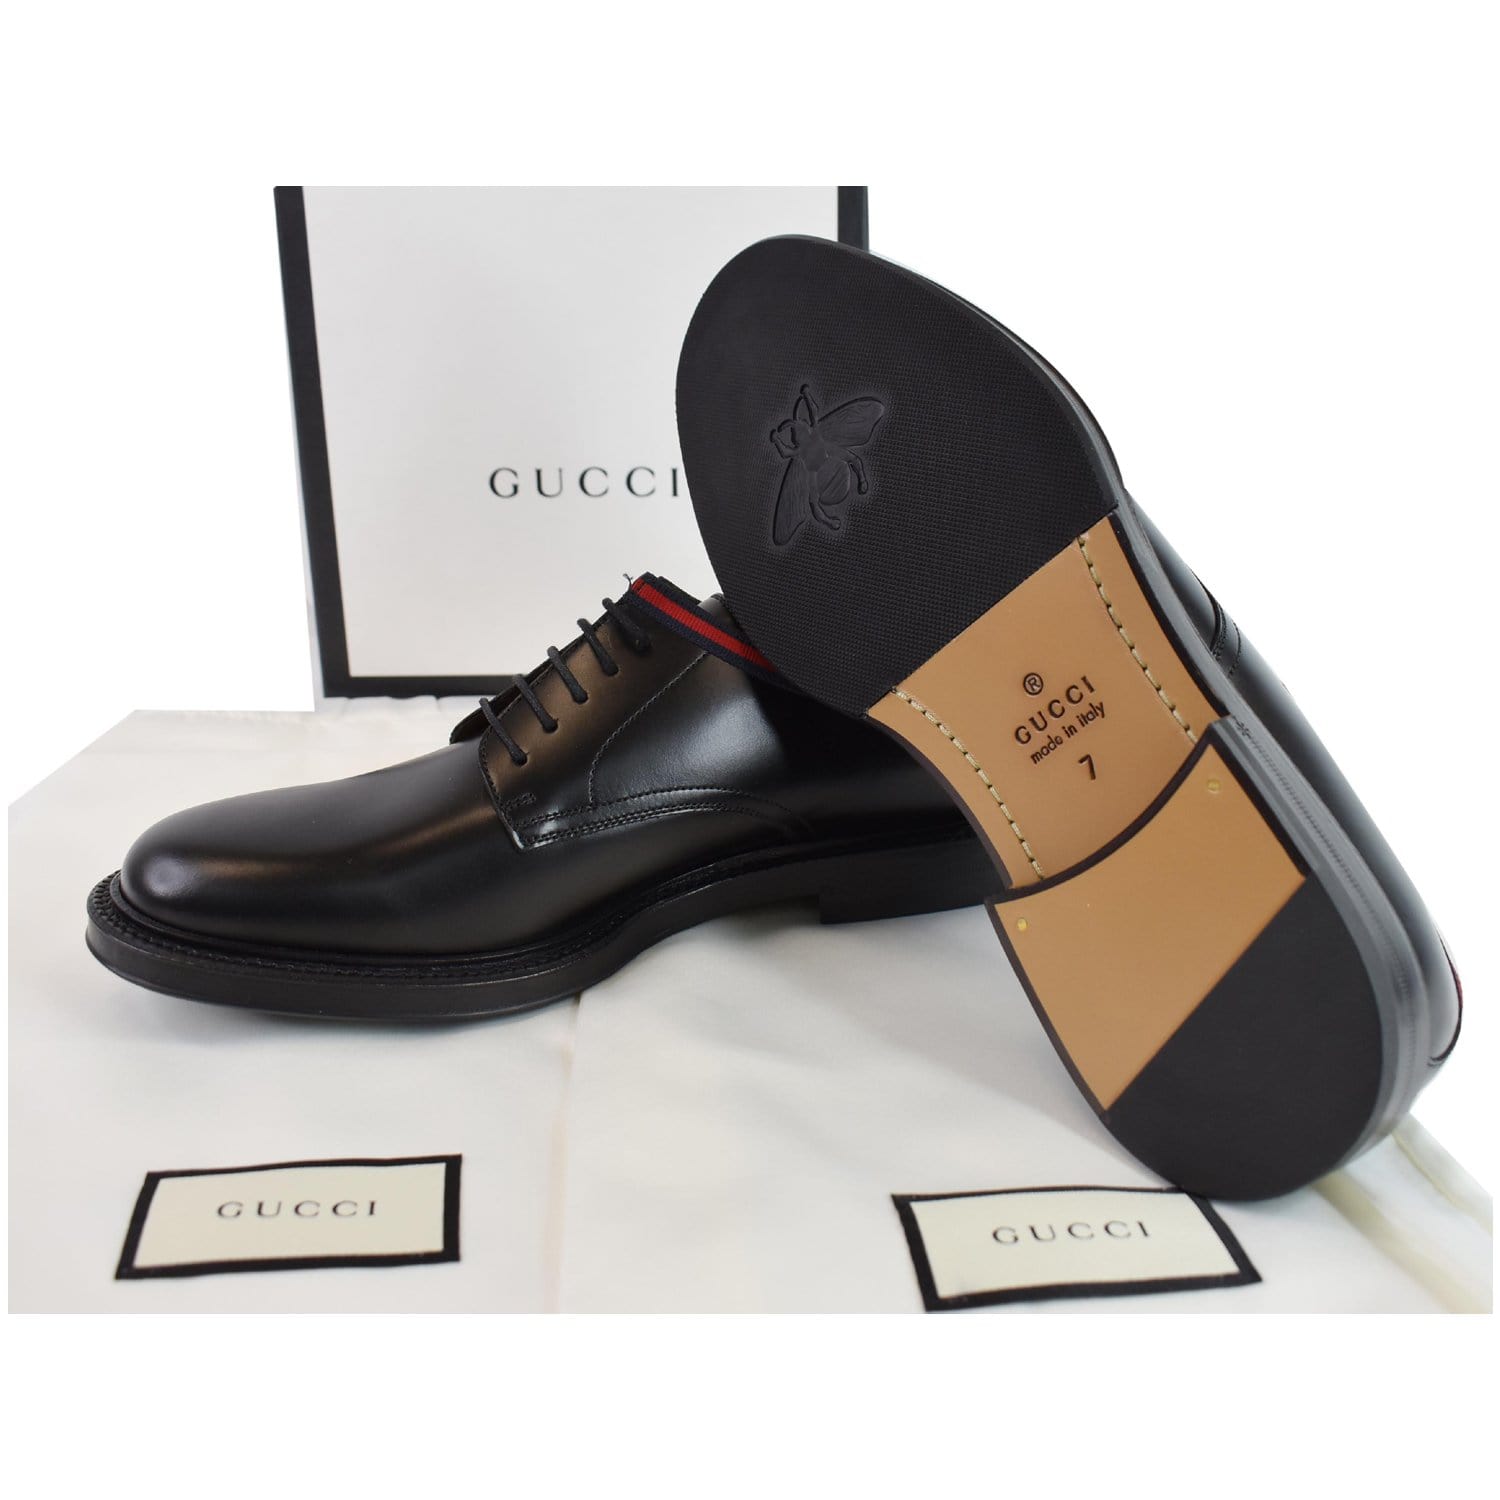 Gucci Classic Web Lace Up Shiny Leather Shoes Black US7